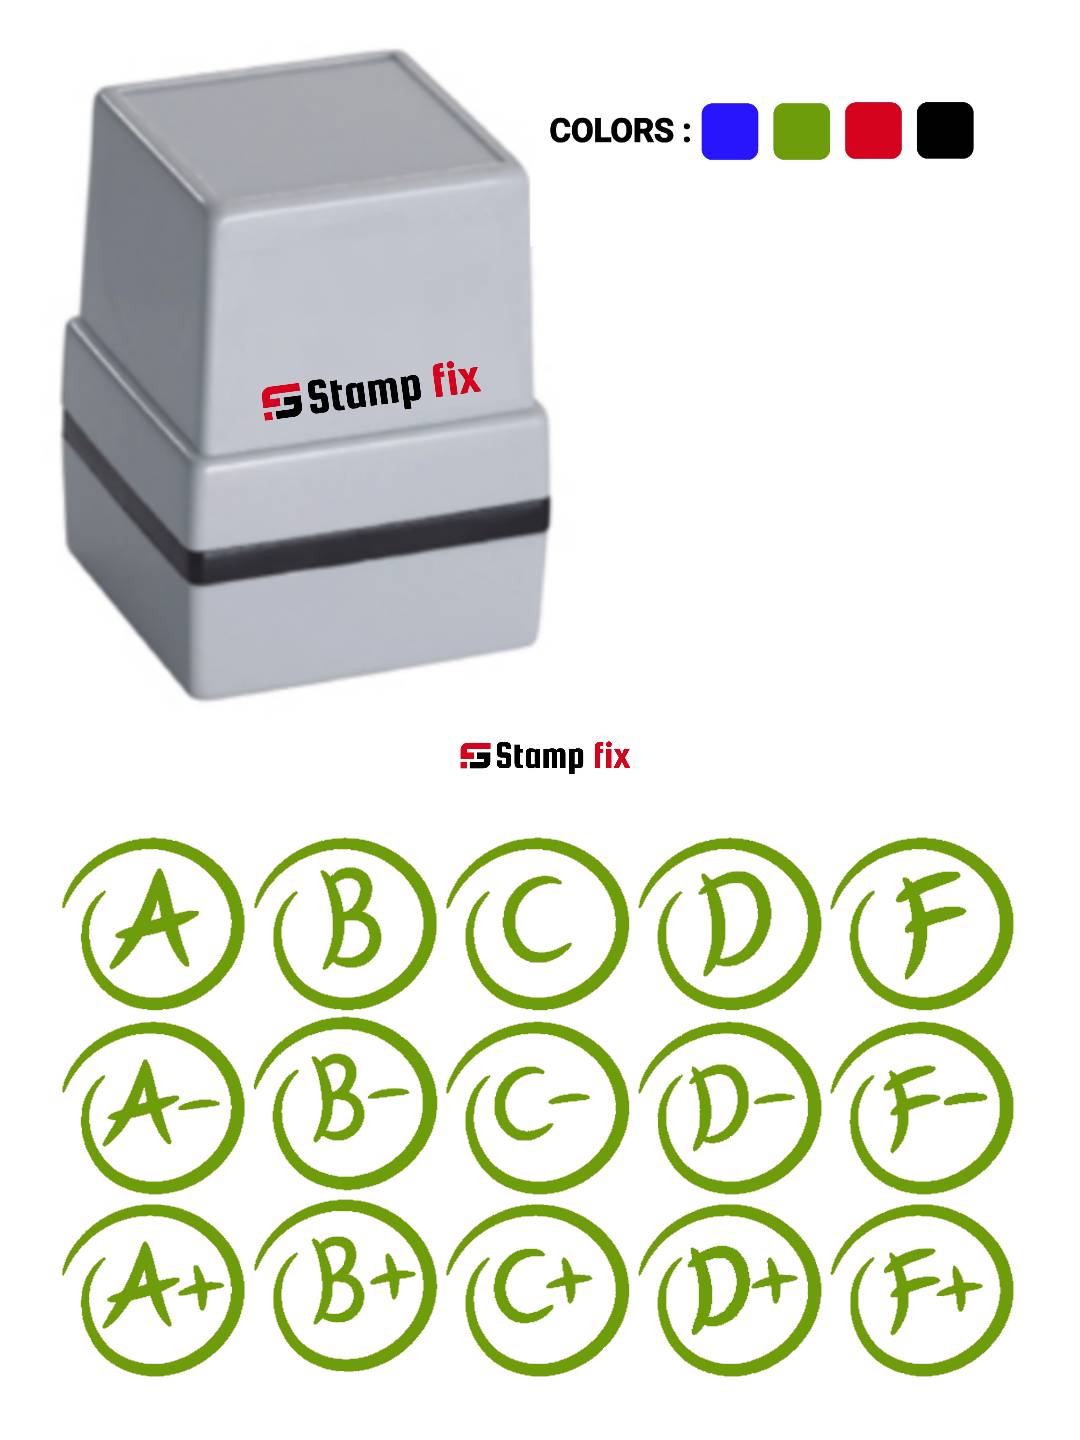 Pre Ink teachers grade stamp, tecahers stamp, school stamp, mark stamp, grade stamp, remark stamp , teachers easy stamp, teachers checking stamp, teachers marking stamp, Stamp by StampFix, a self-inking stamp with high-quality impressions
in India, nylon stamp, rubber stamp, pre ink stamp, polymer stamp, urgent stamp